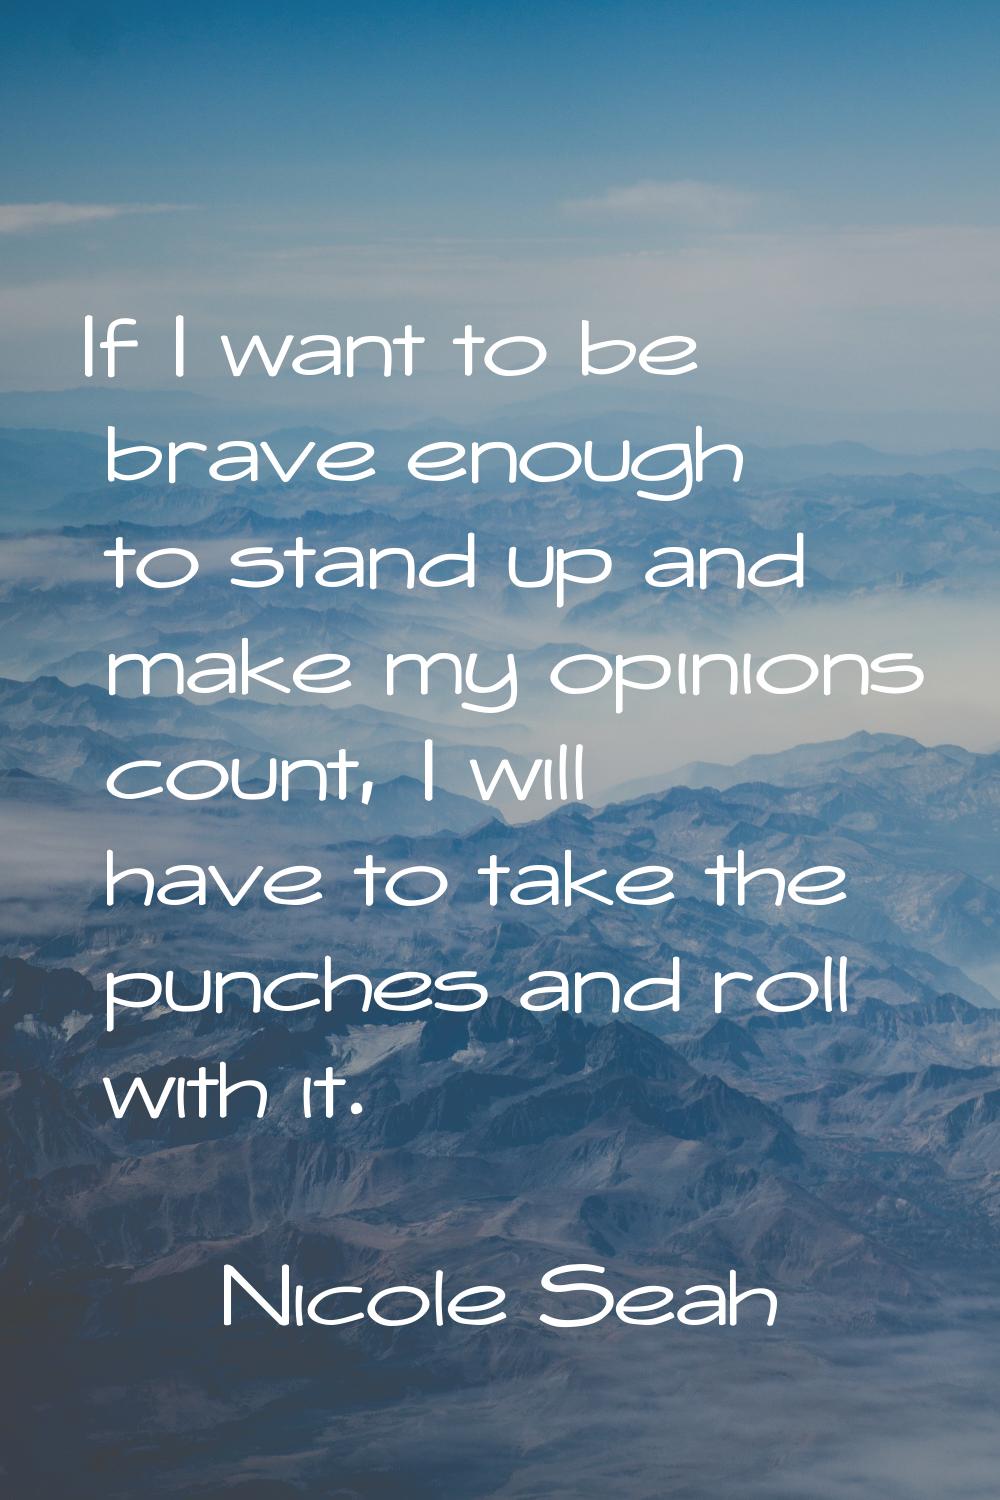 If I want to be brave enough to stand up and make my opinions count, I will have to take the punche